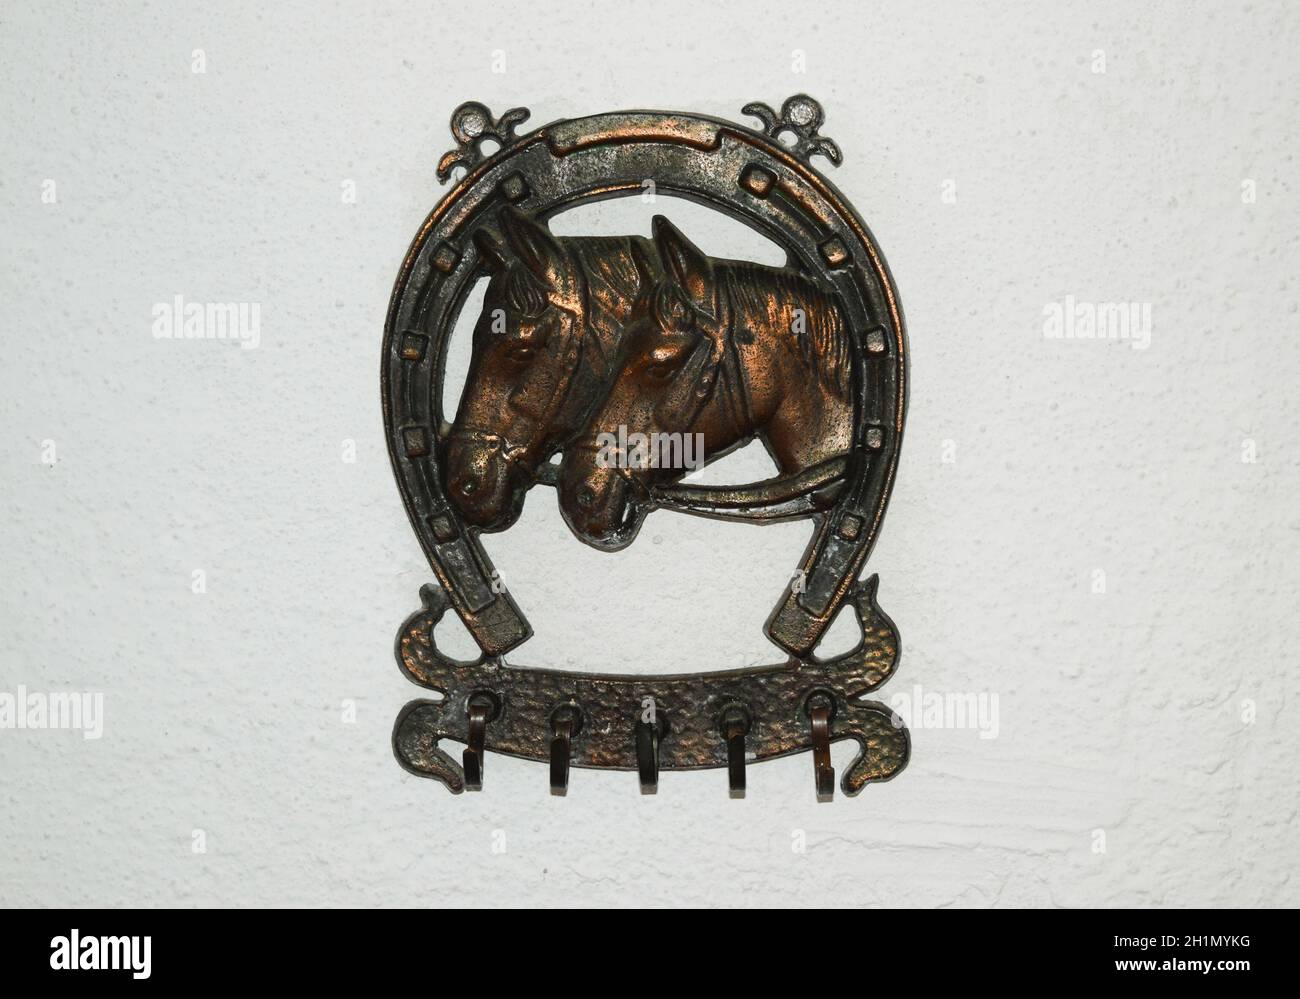 Clothes hanger decorated with the image of a horseshoe and the heads of horses. Stock Photo